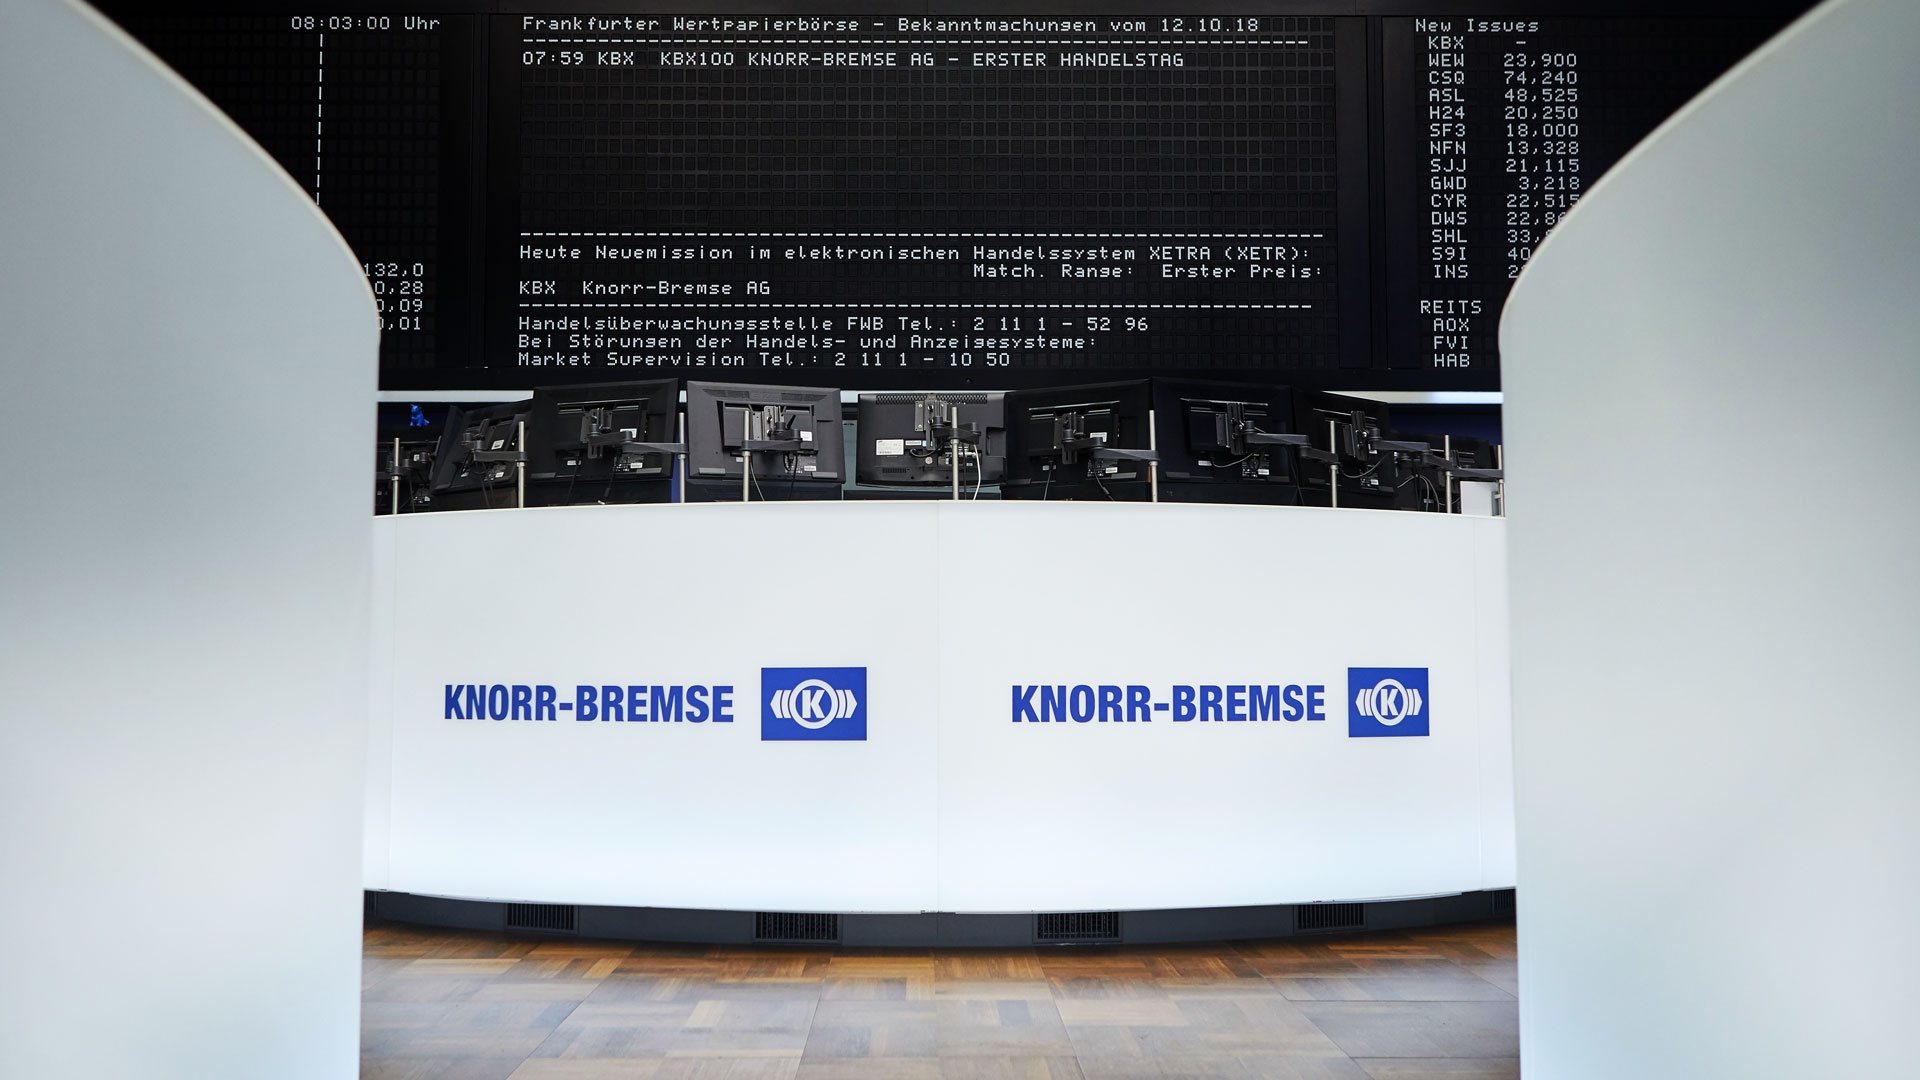 October 12, 2018: The empty trading floor of the Frankfurt stock exchange before the market opens, showing the notice "KBX100 Knorr-Bremse AG - first trading day" on the scoreboard.